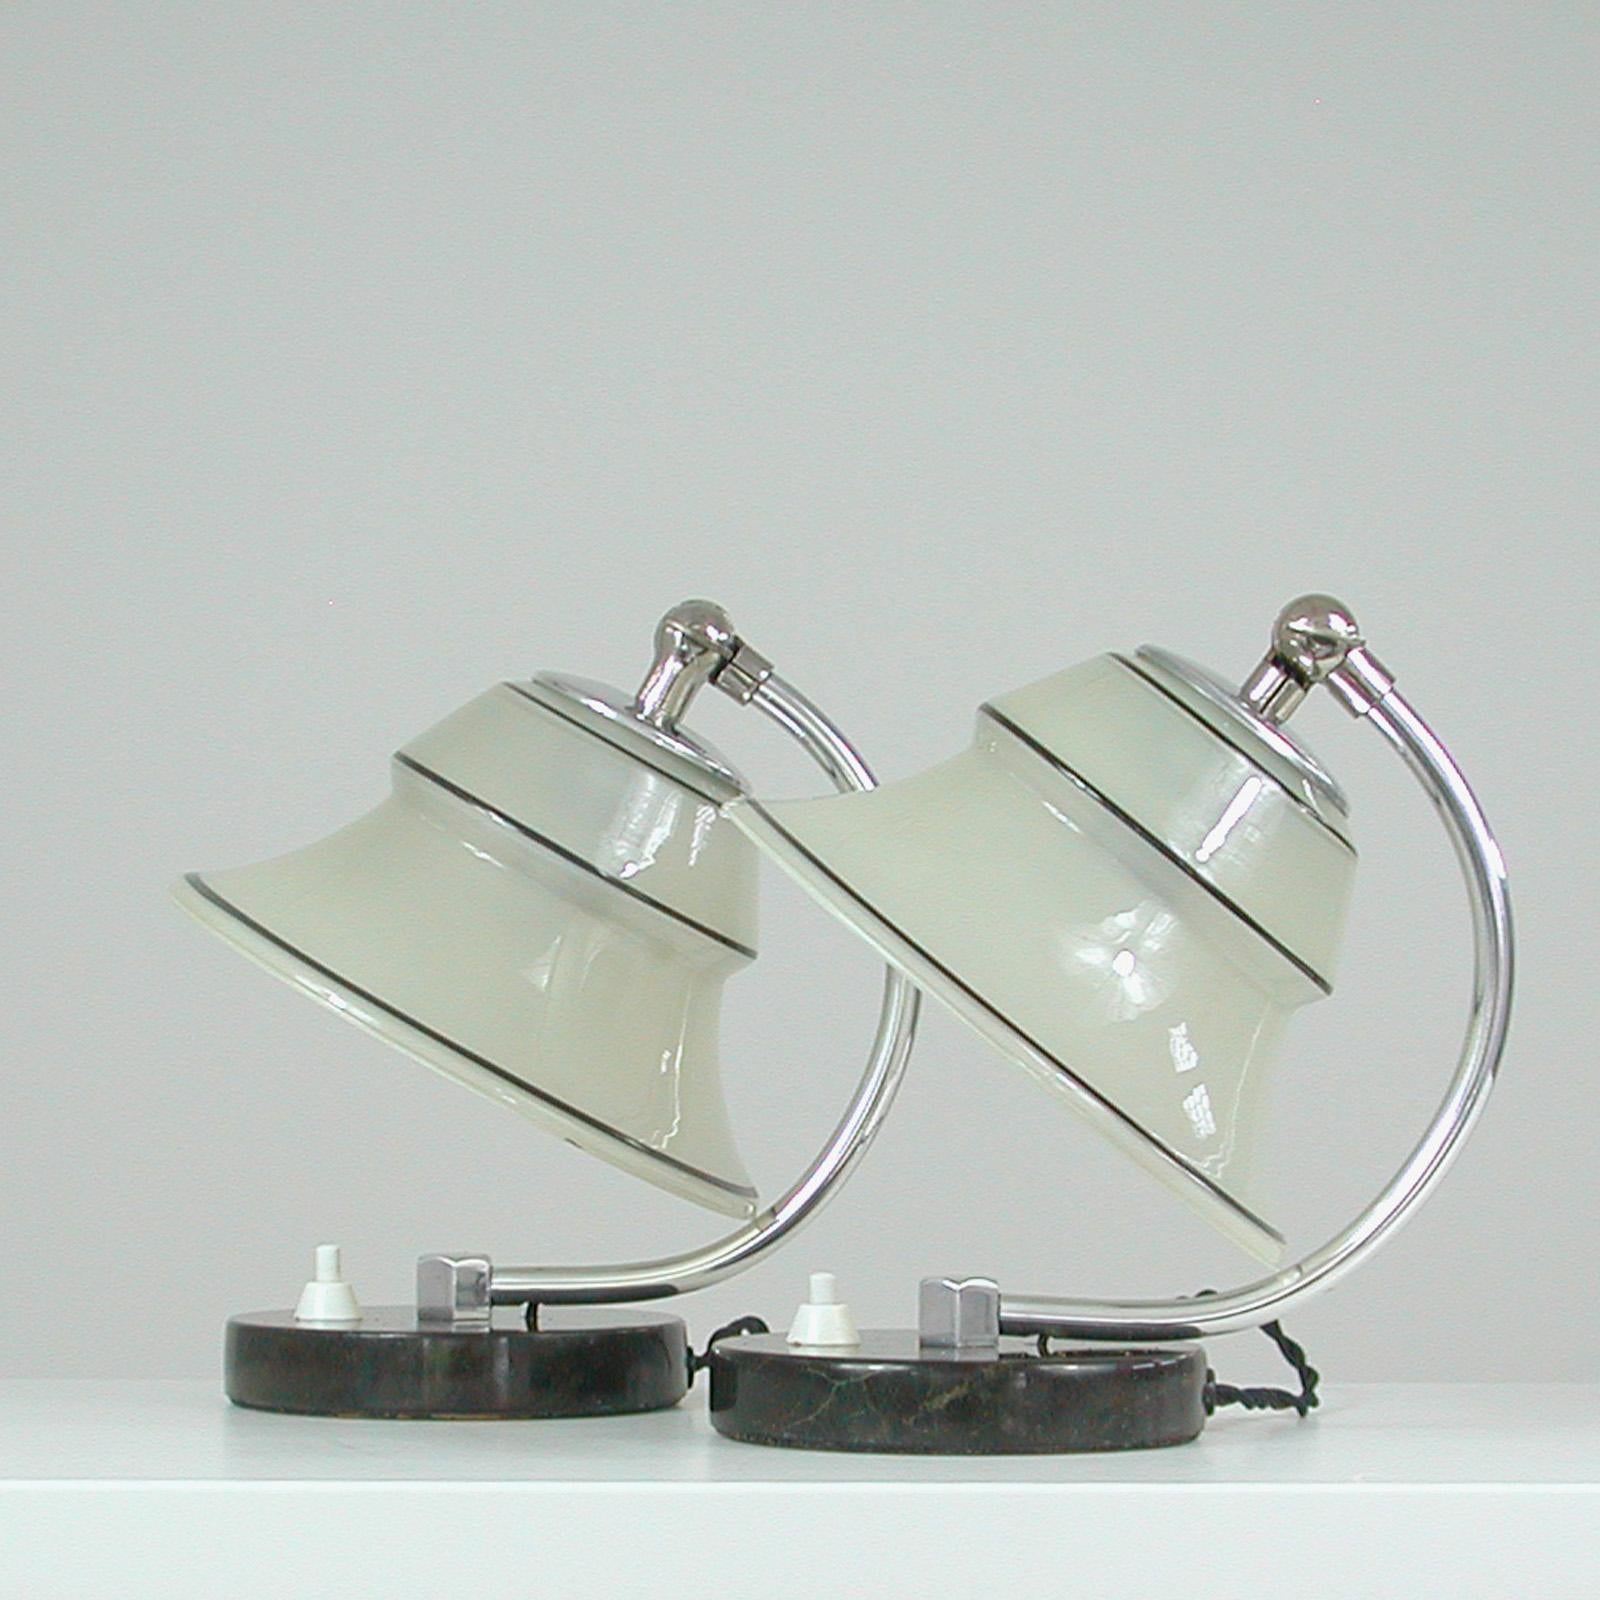 German Art Deco Enameled Satin Glass, Marble and Aluminum Table Lamps, 1930s For Sale 5